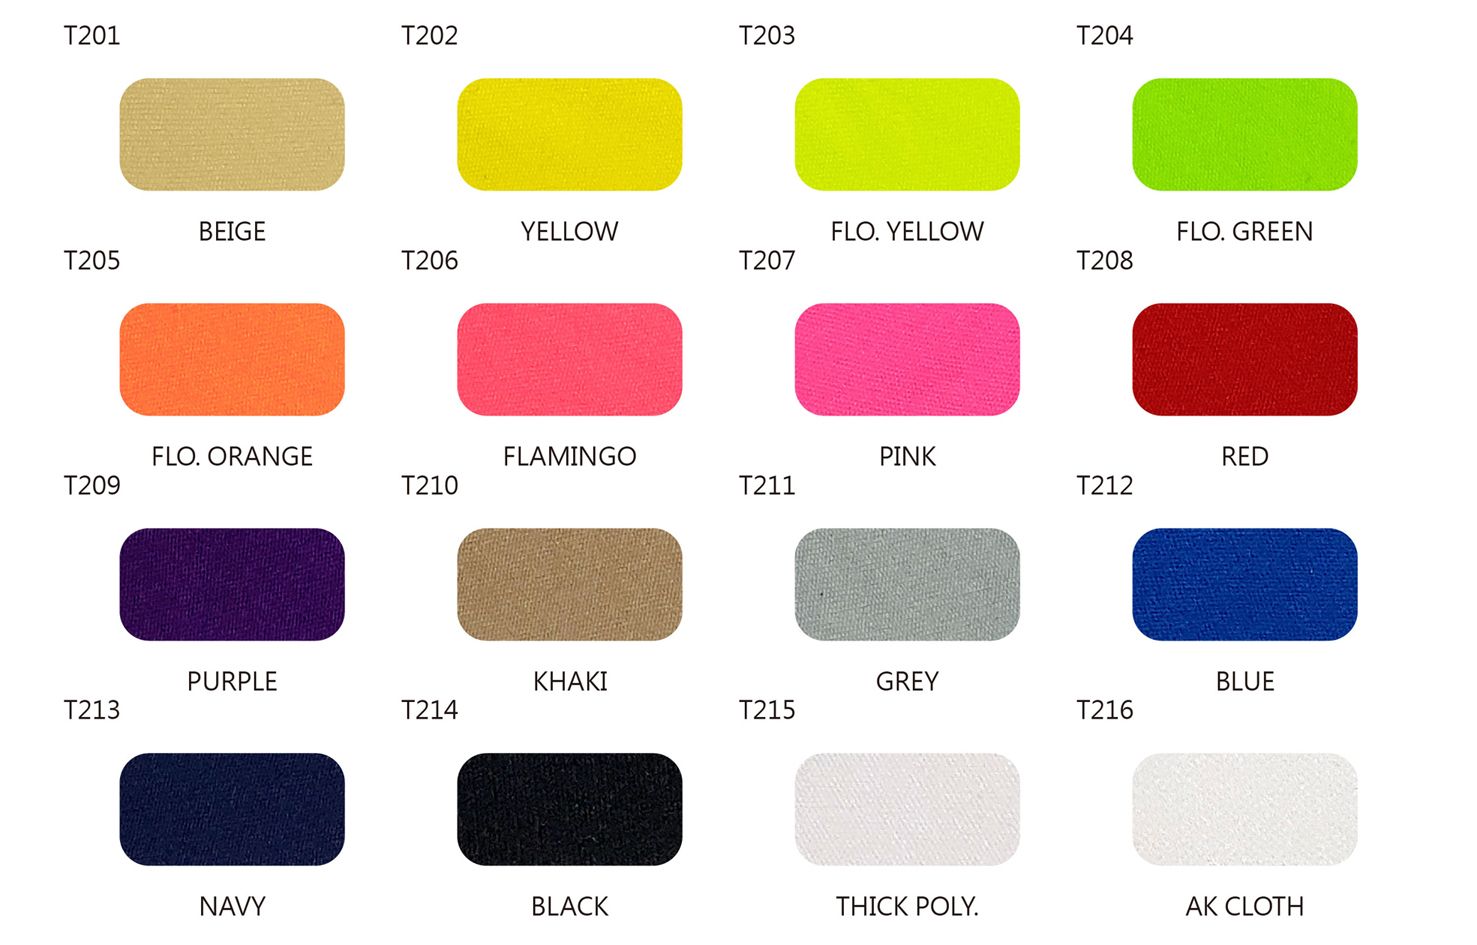 Many textile and color choices for Neoprene lamination.